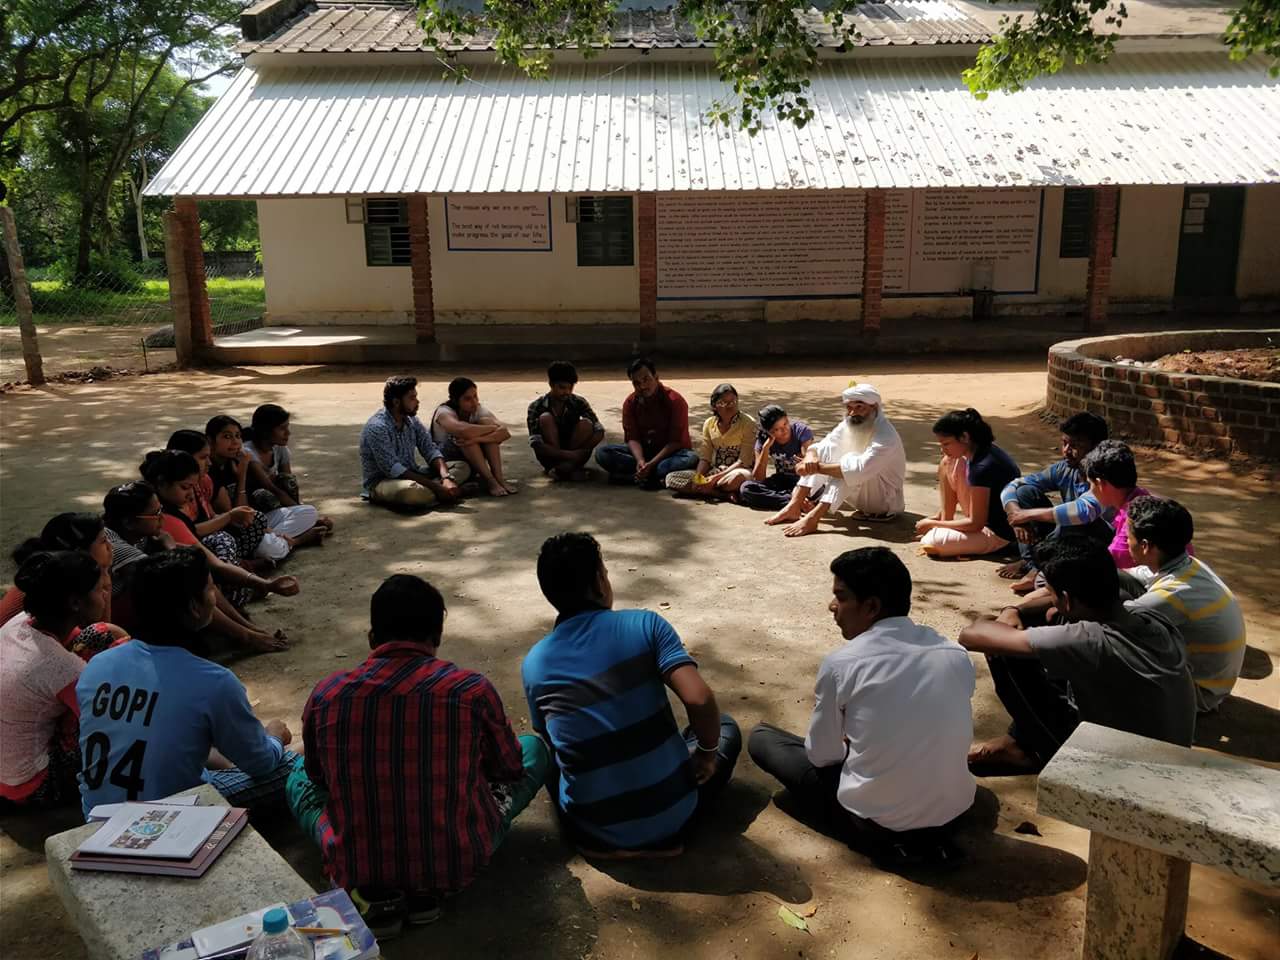 Students of the Department visiting the Rural Schools under the Project Puchki and enquiring the sanitation facilities.